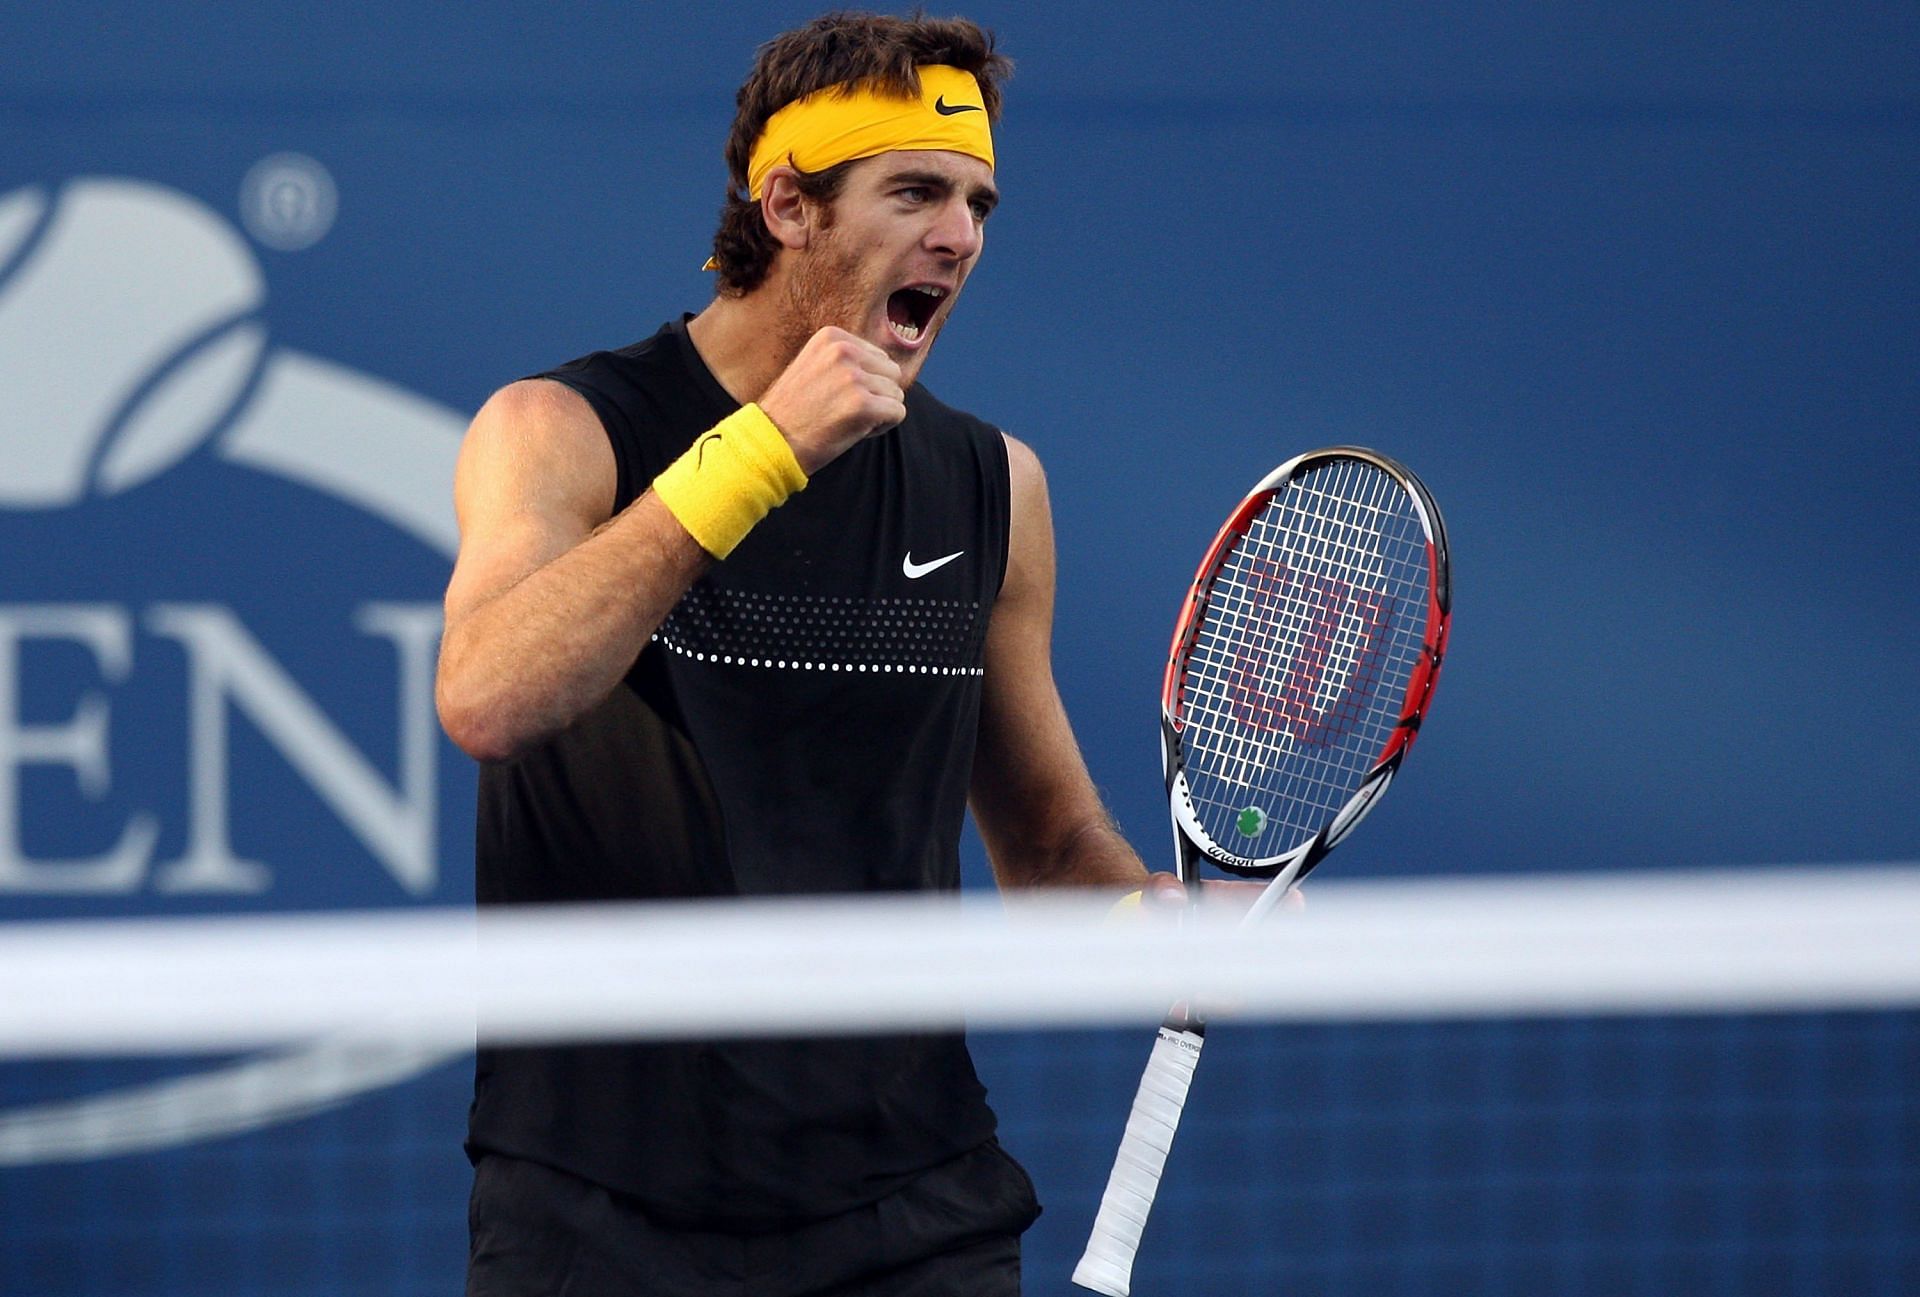 Juan Martin Del Potro defeated Rafael Nadal and Roger Federer on the trot to win his first Grand Slam title